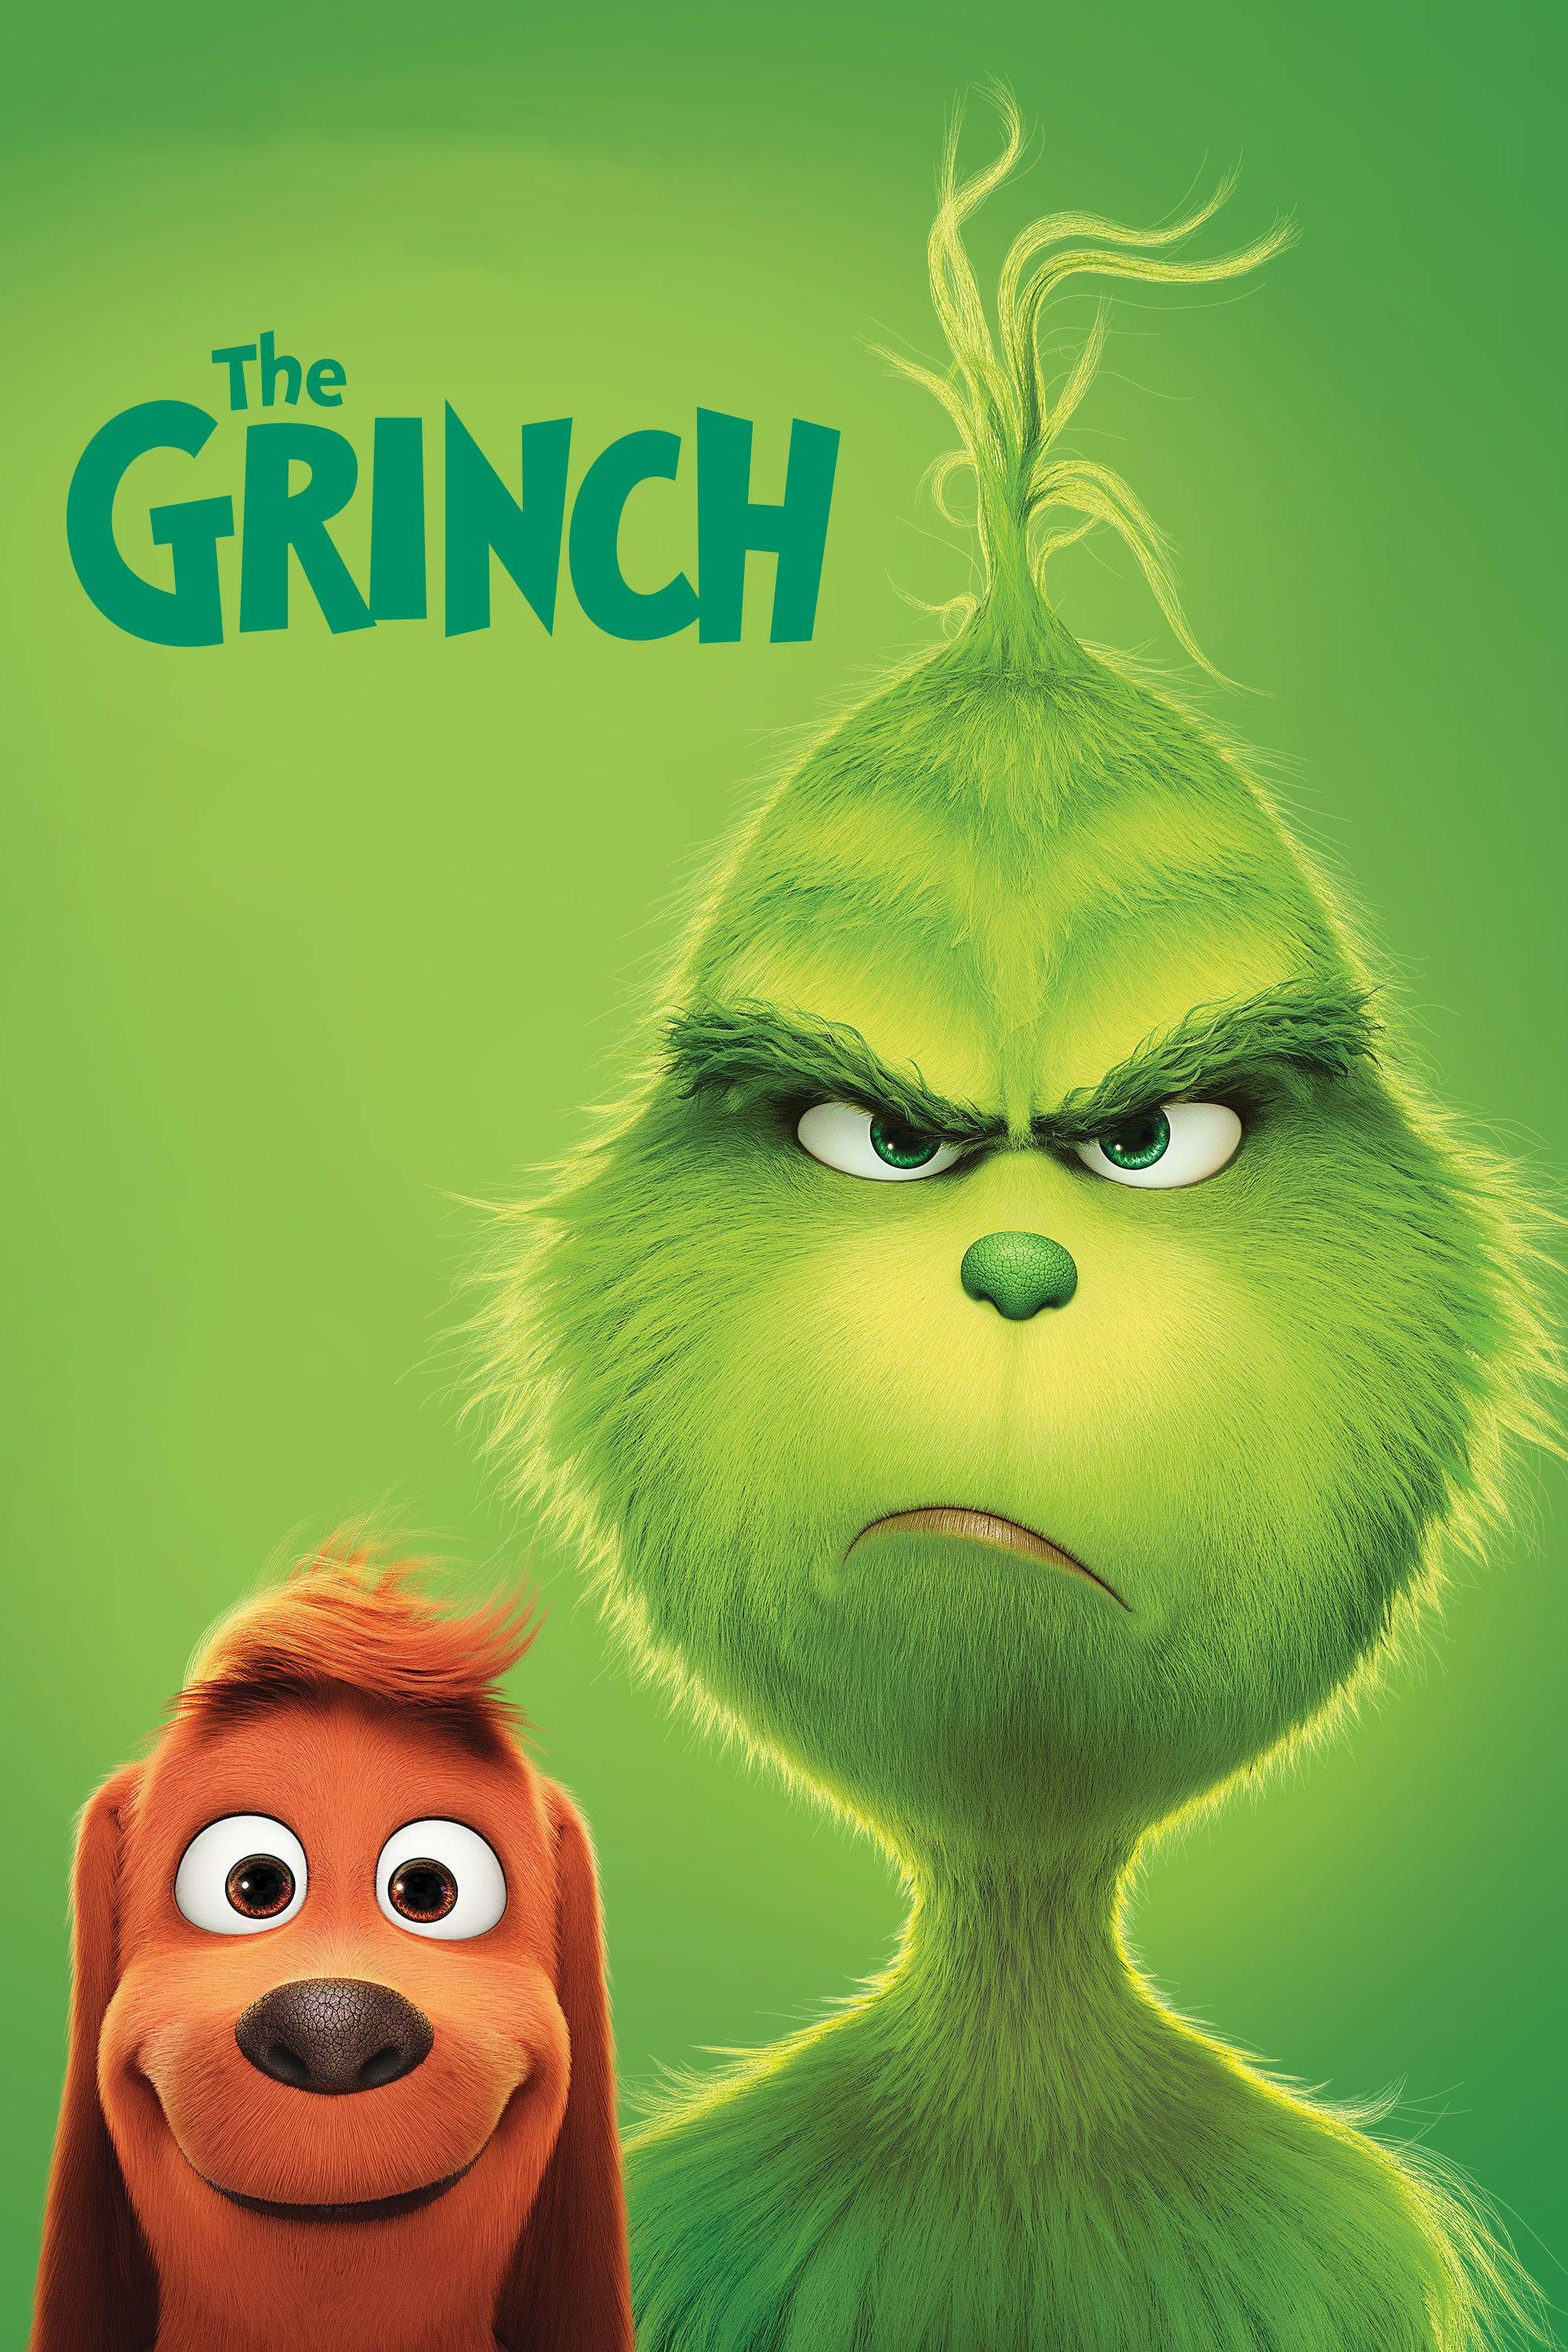 Grinch Animated Poster Wallpaper